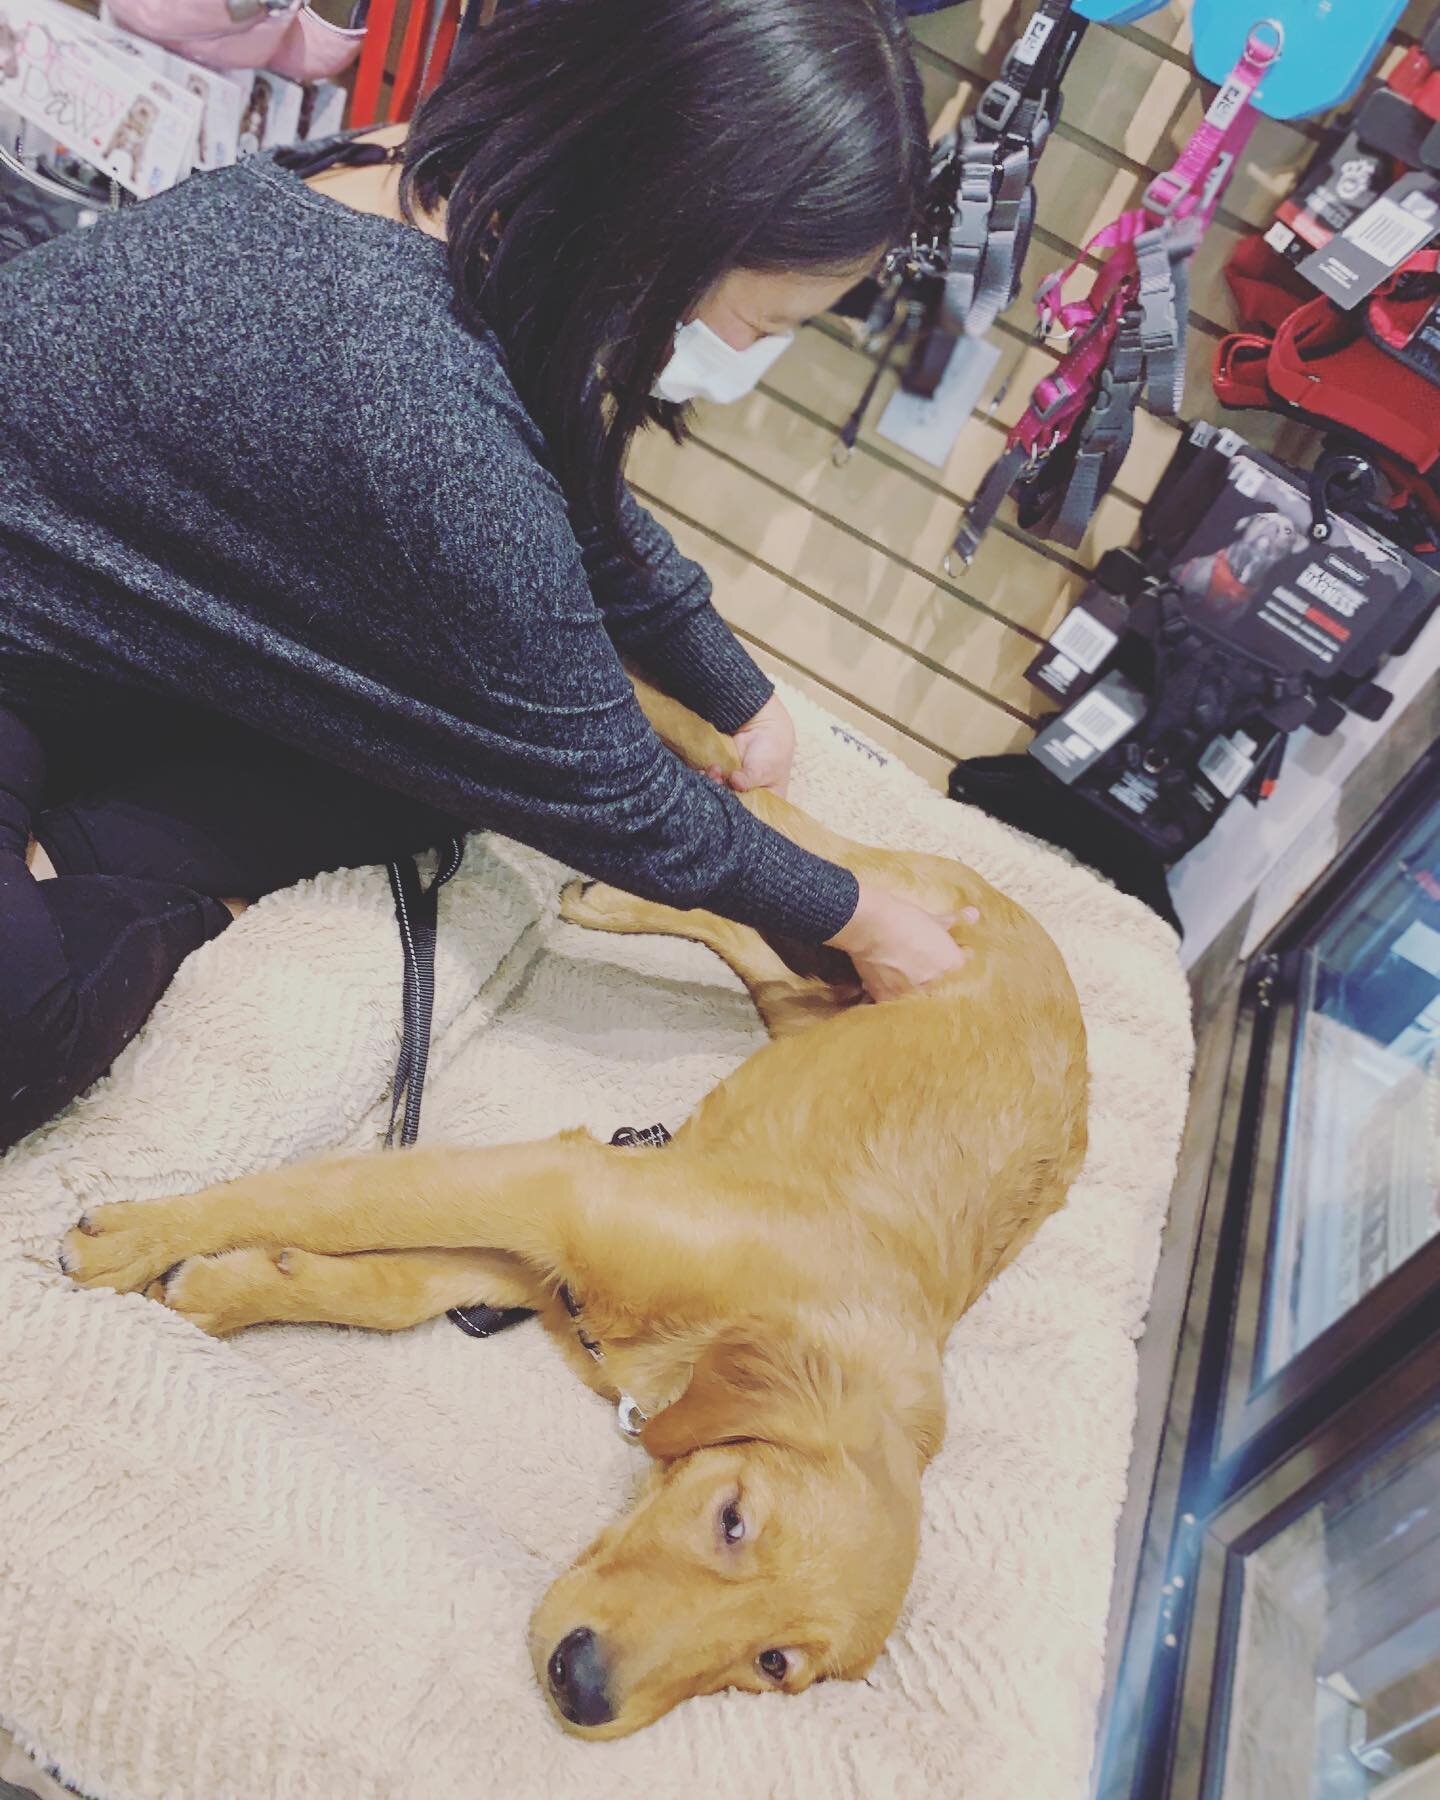 Canine massage for all the stages of dog&rsquo;s life✨ 
.
Strada has been getting massages ever since she was a puppy!  Puppy massage is beneficial for:
.
-learning calm, settle
-tense muscles as they could run like crazy!
-good husbandry, getting us